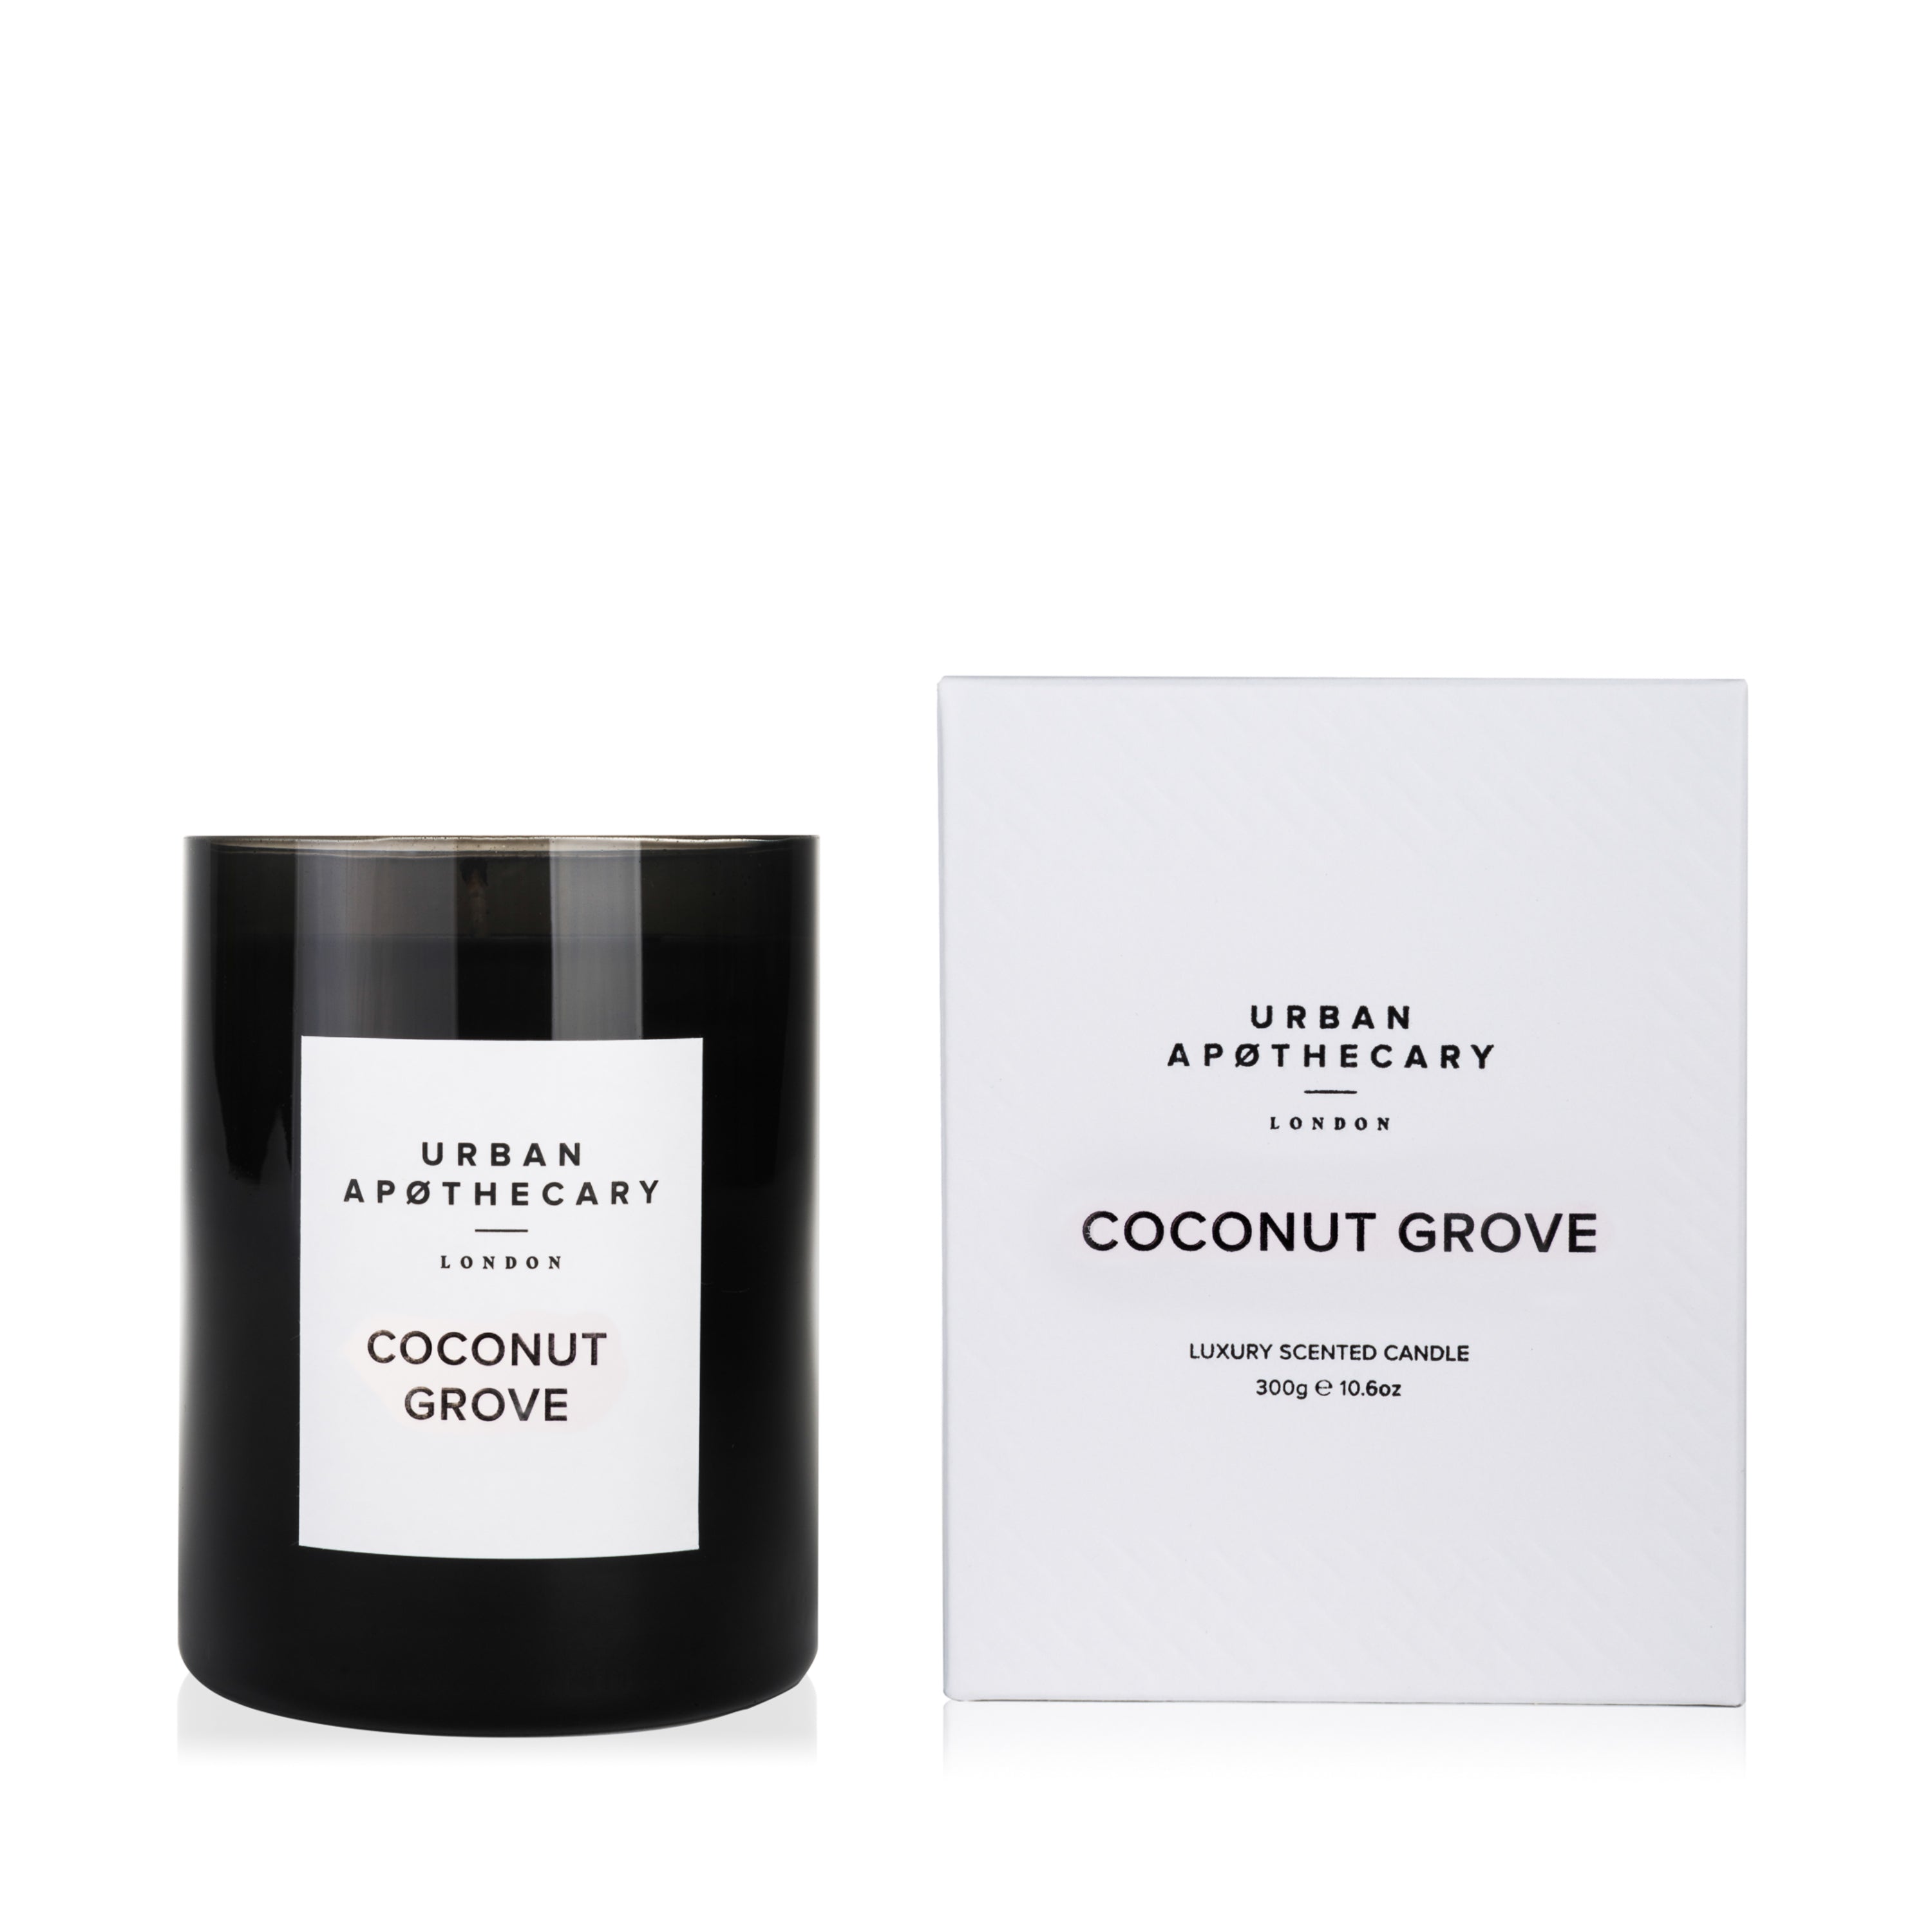 URBAN APOTHECARY Coconut Grove Luxury Glass Candle 300 g